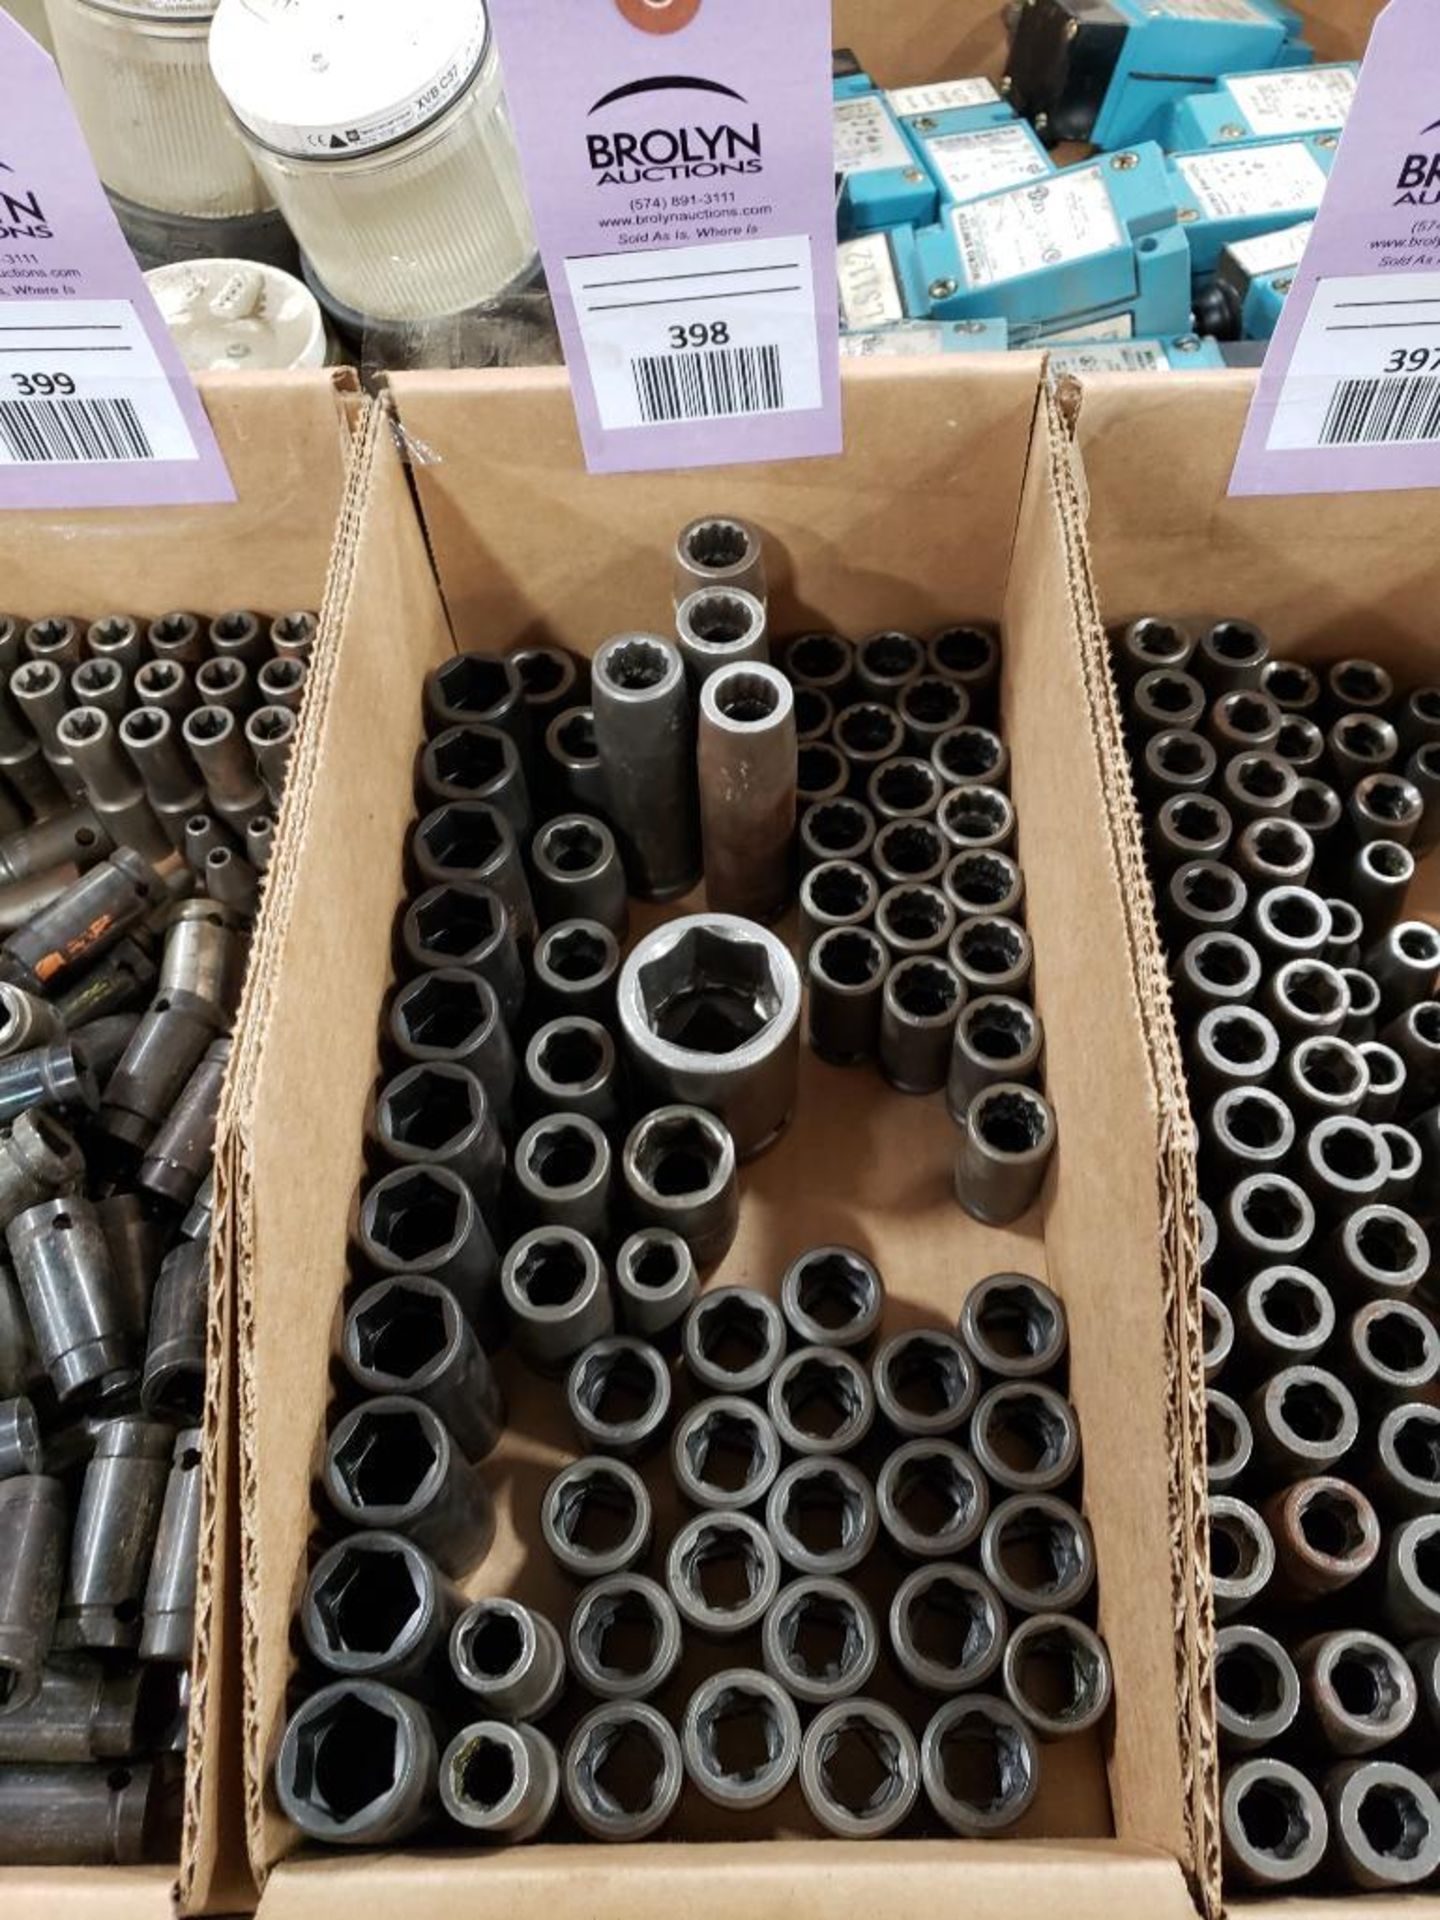 Large Qty of assorted APEX standard socket. 3/8" and 1/2" drive.